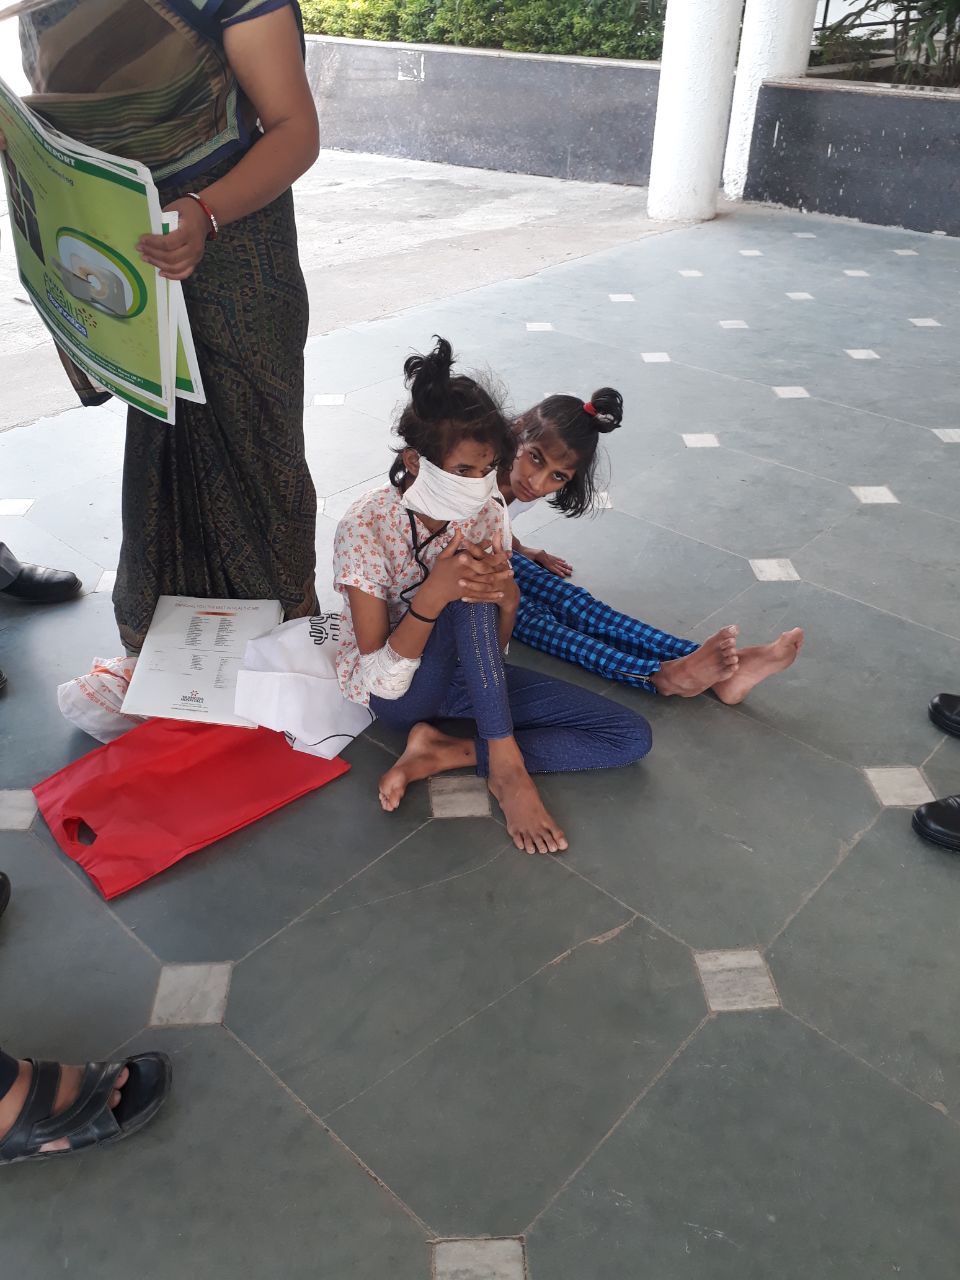  Divyang sisters arrived to meet the dragged collector on the floor